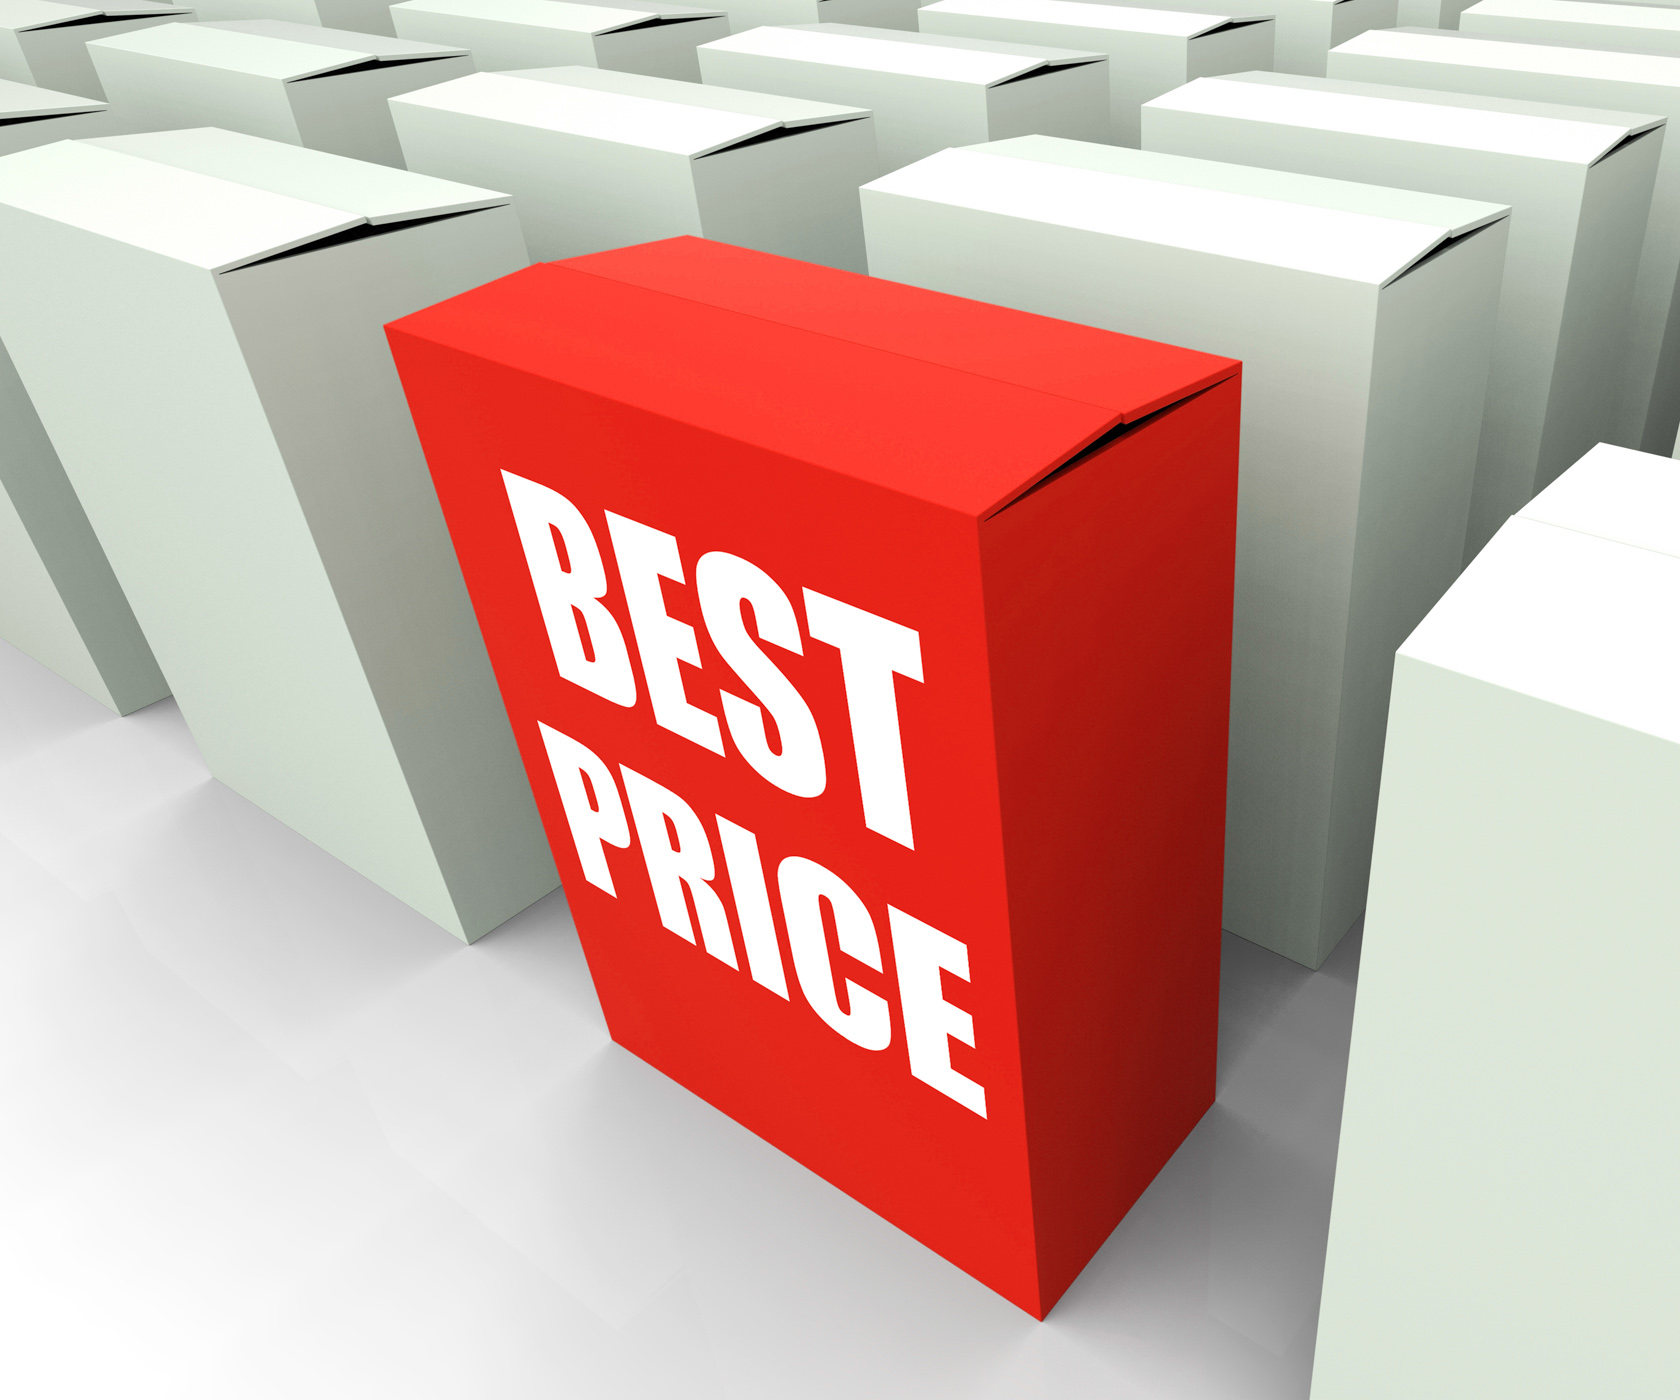 Best price box represents bargains and discounts photo